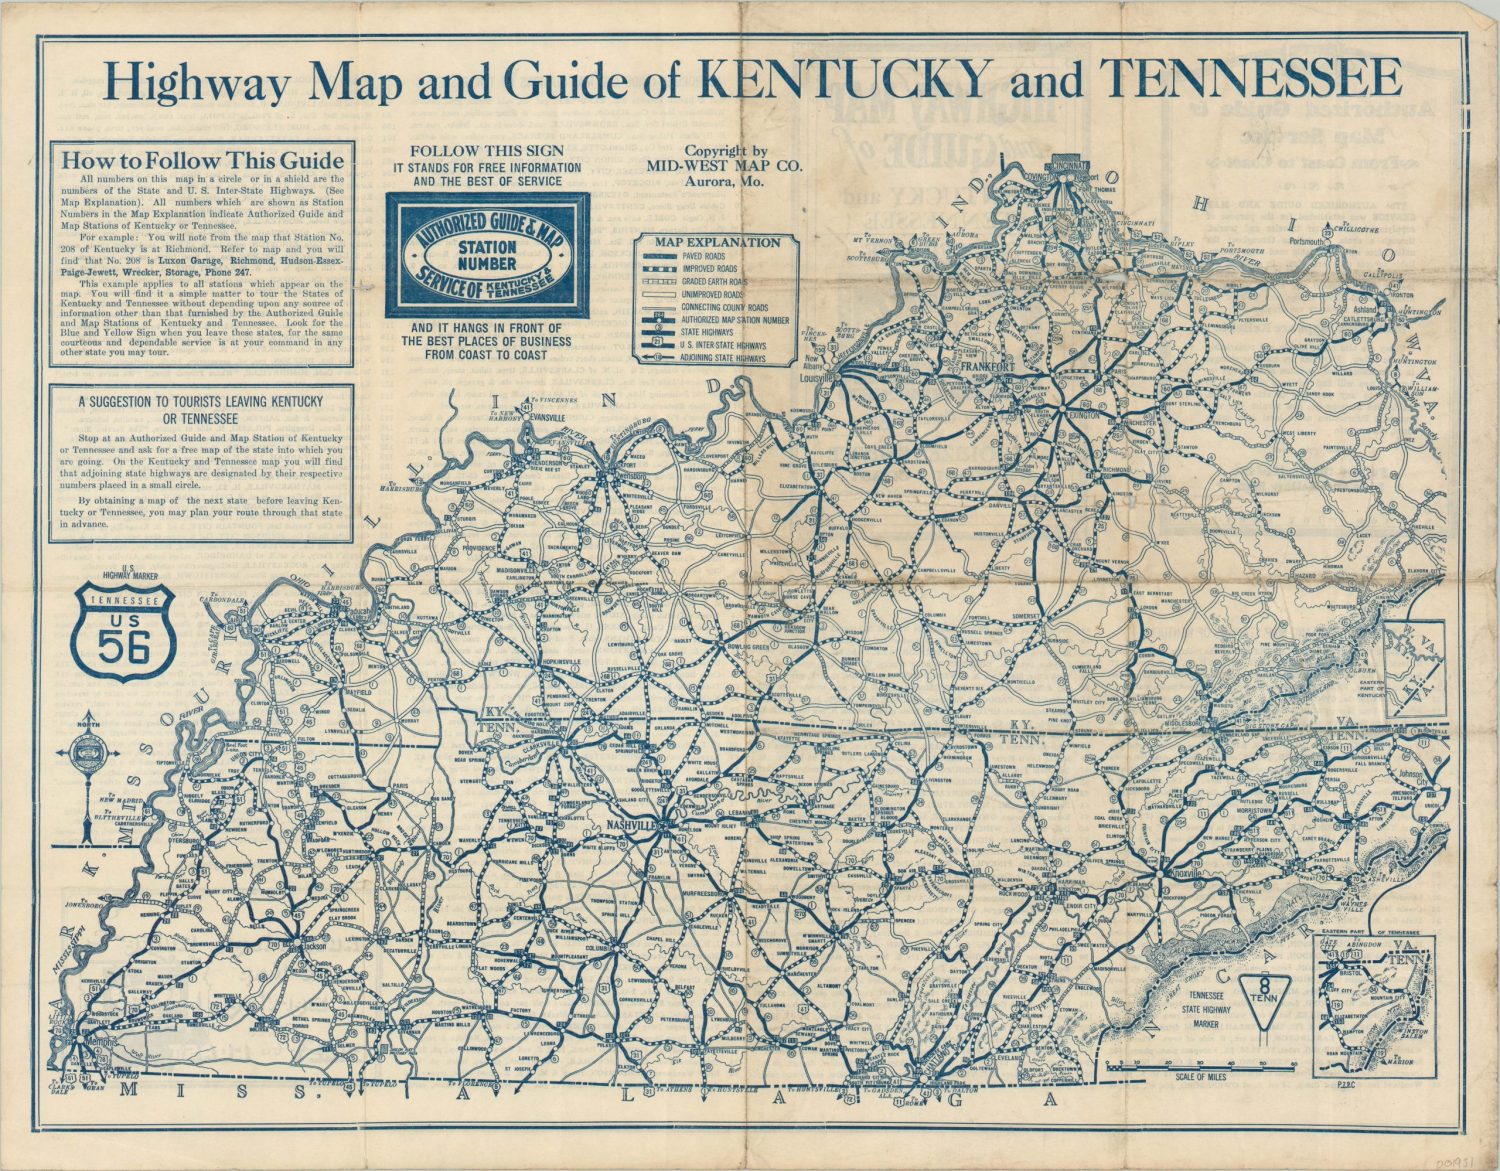 Highway Map and Guide of Kentucky and Tennessee Curtis Wright Maps